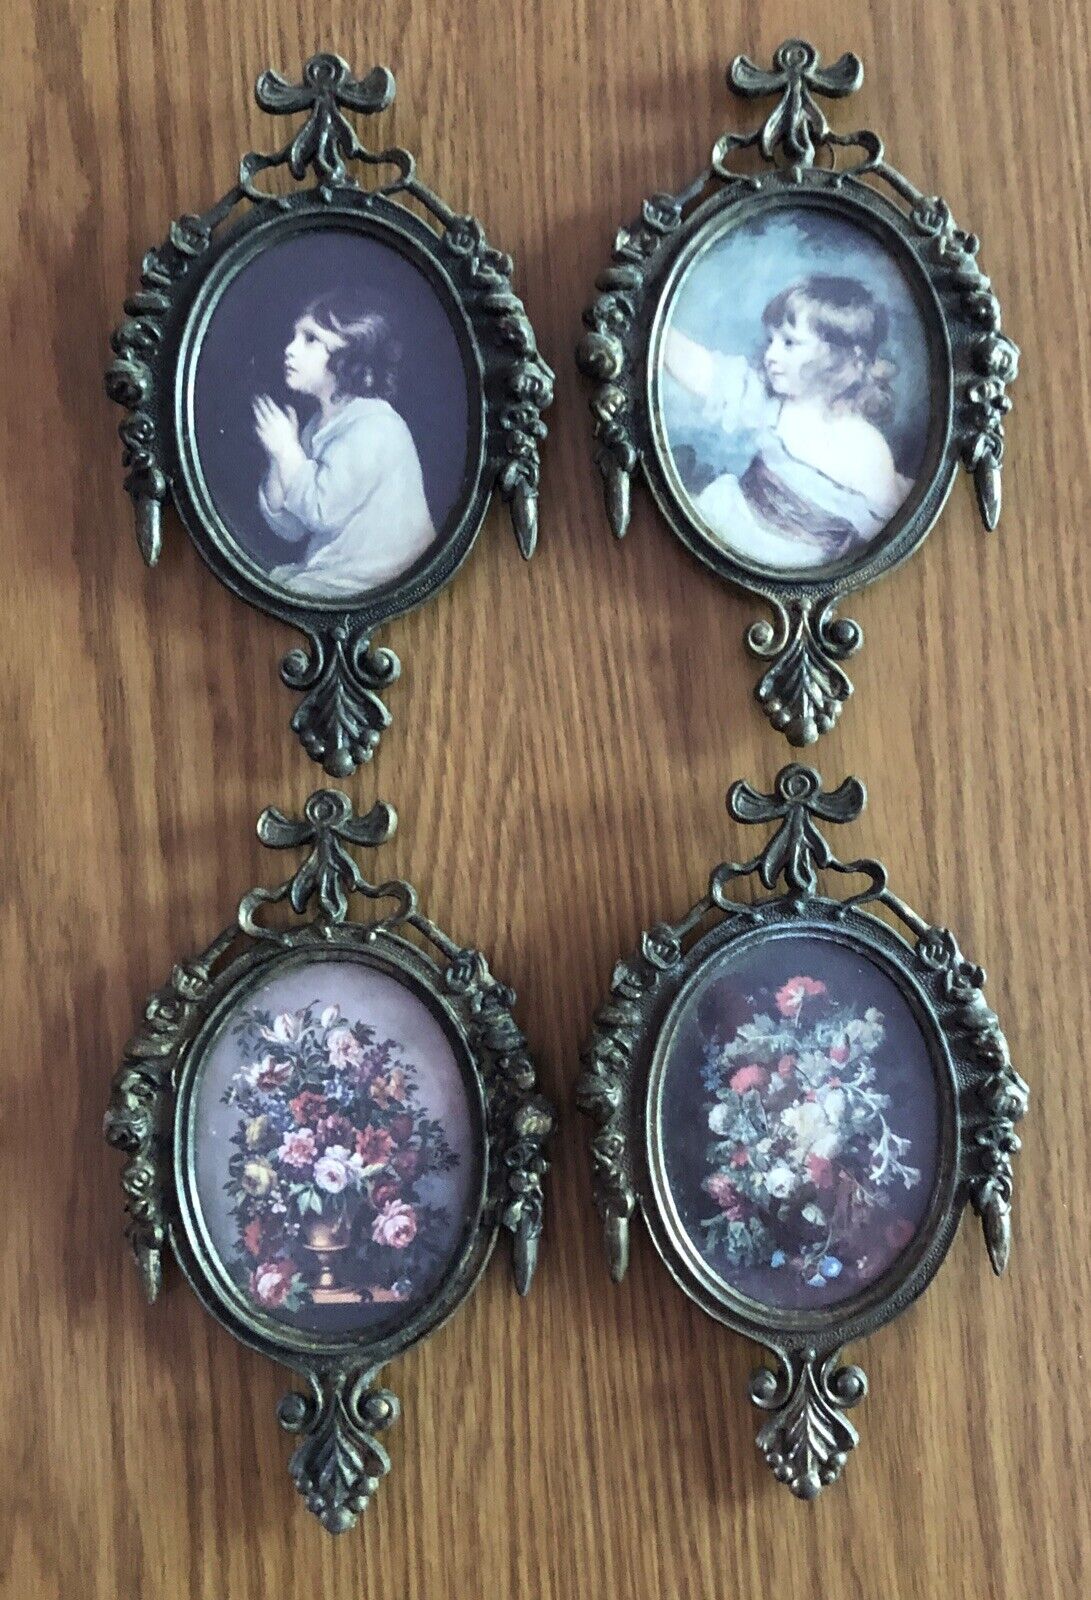 SET OF 4 VINTAGE OVAL METAL FRAME WALL PICTURES GIRLS & FLOWERS MADE IN ITALY